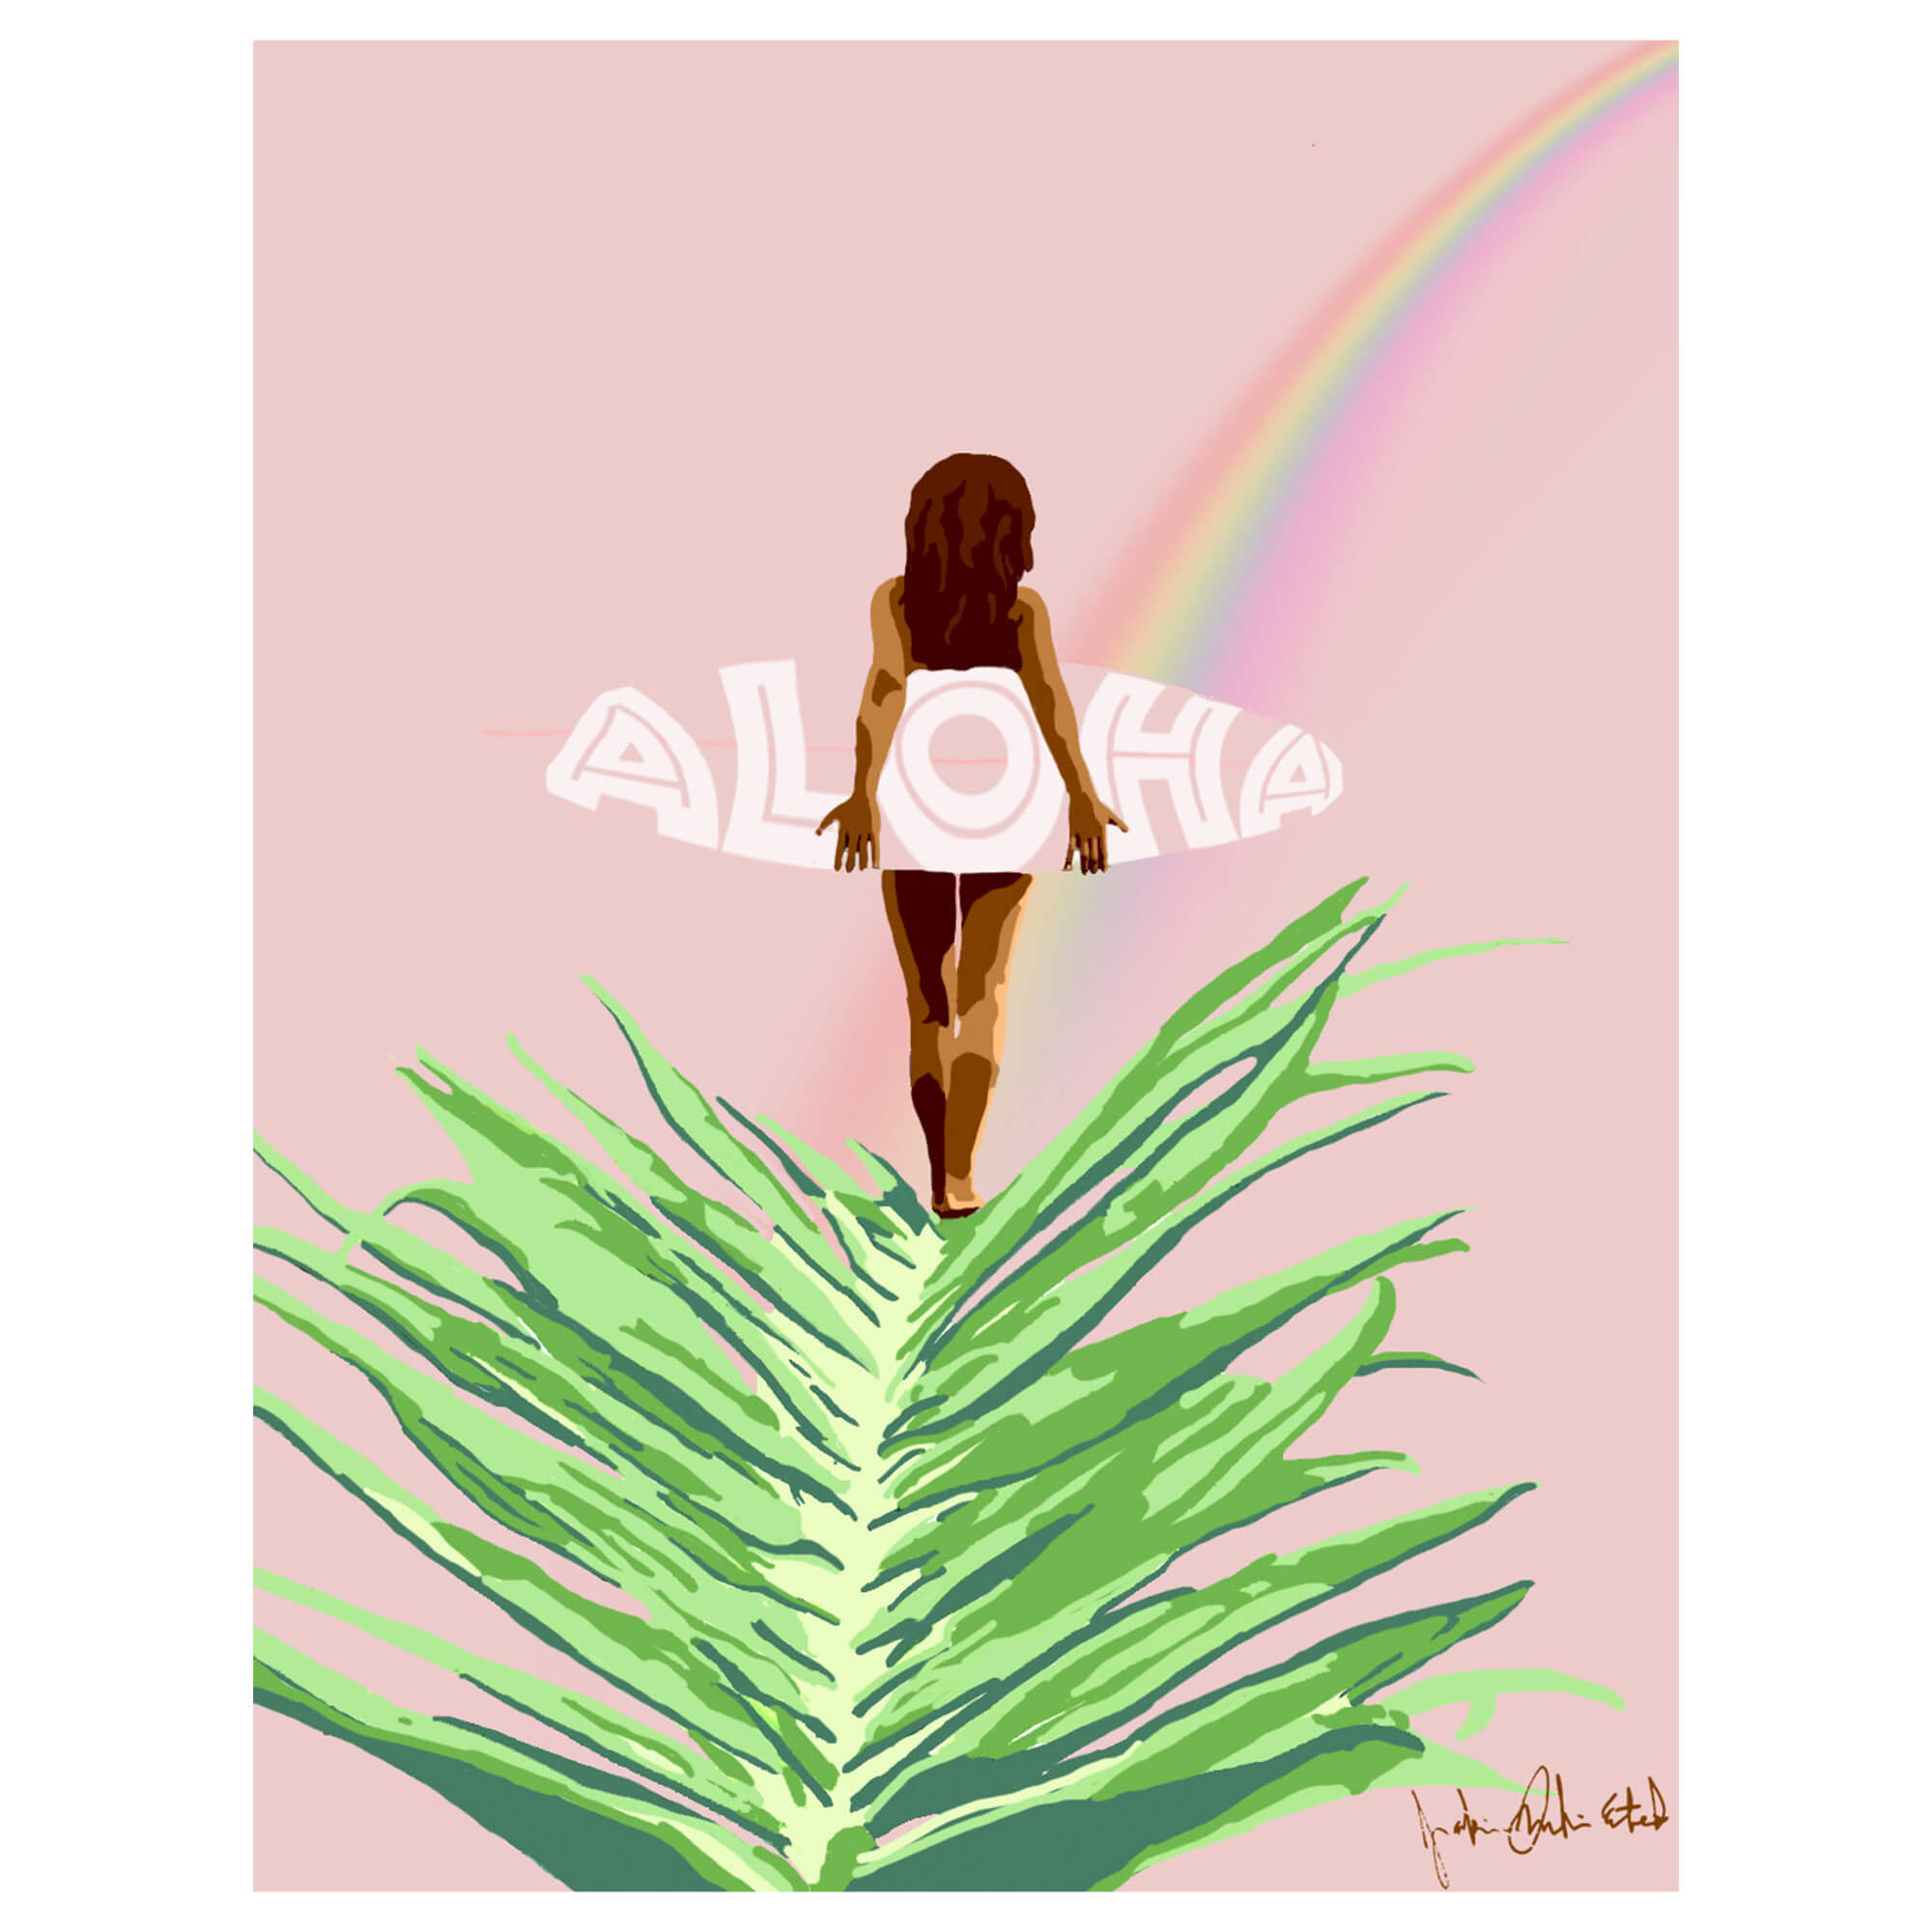 A matted art print featuring a woman holding a surfboard following a beautiful rainbow on a pastel pink background by Hawaii artist Jackie Eitel